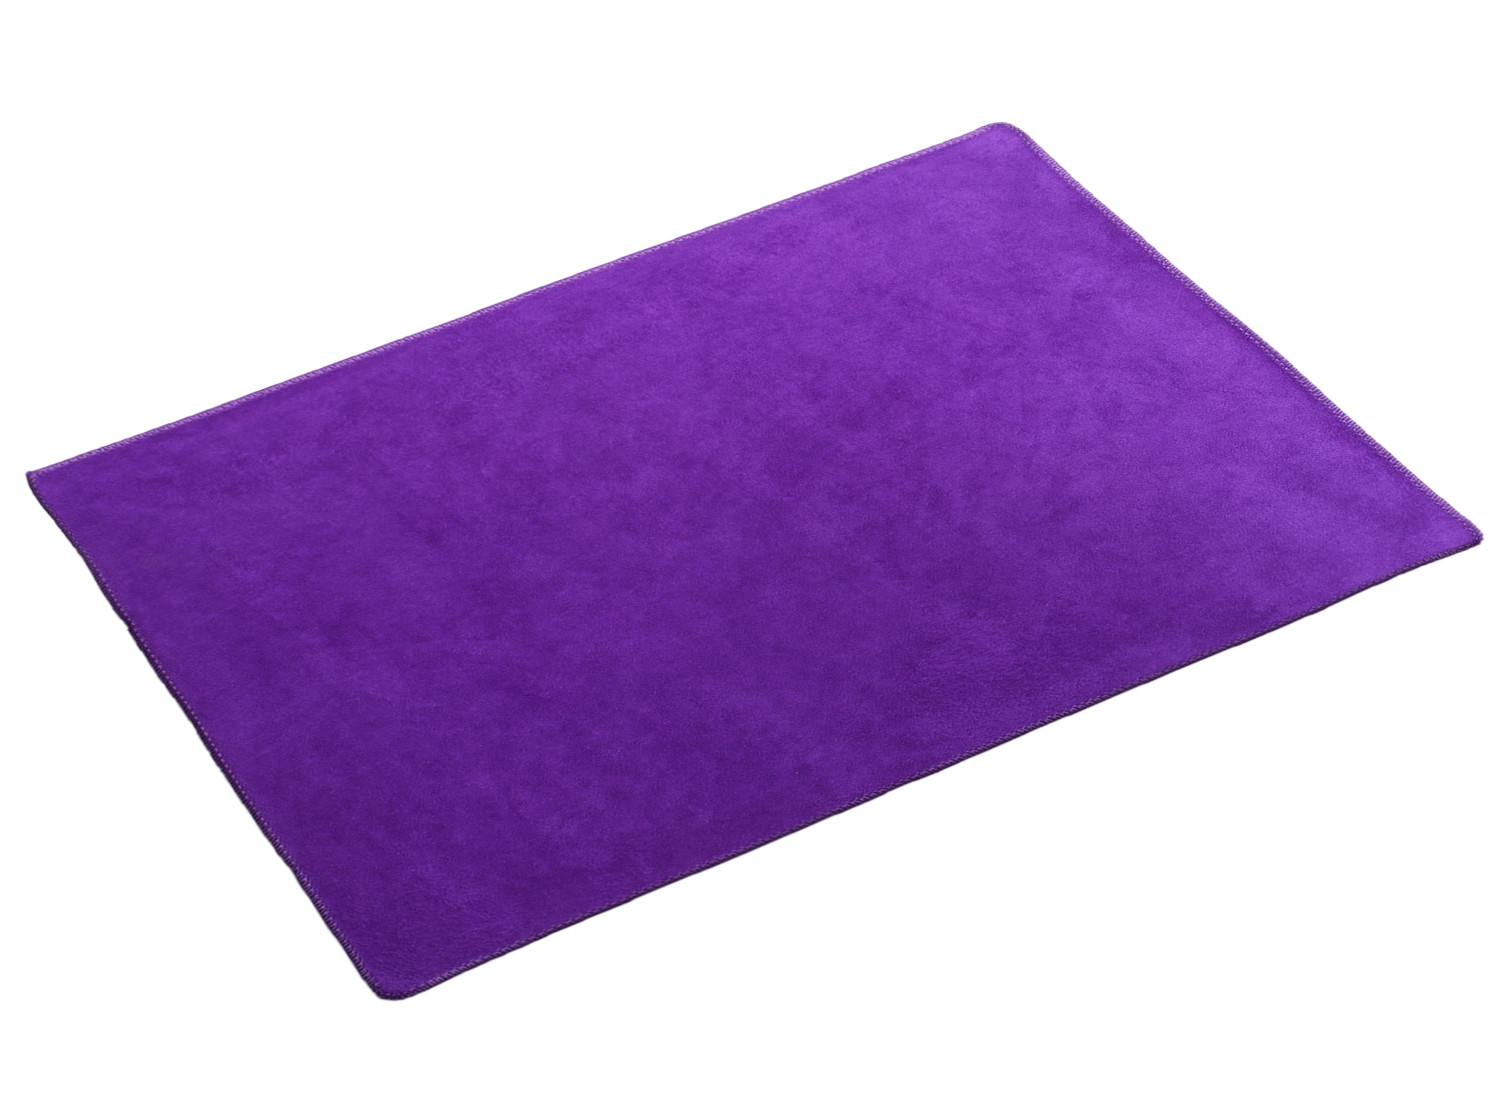 Kuber Industries Cleaning Cloths|Microfiber Highly Absorbent Wash Towels for Kitchen,Car,Window,24 x 16 Inch,Pack of 2 (Gray & Purple)